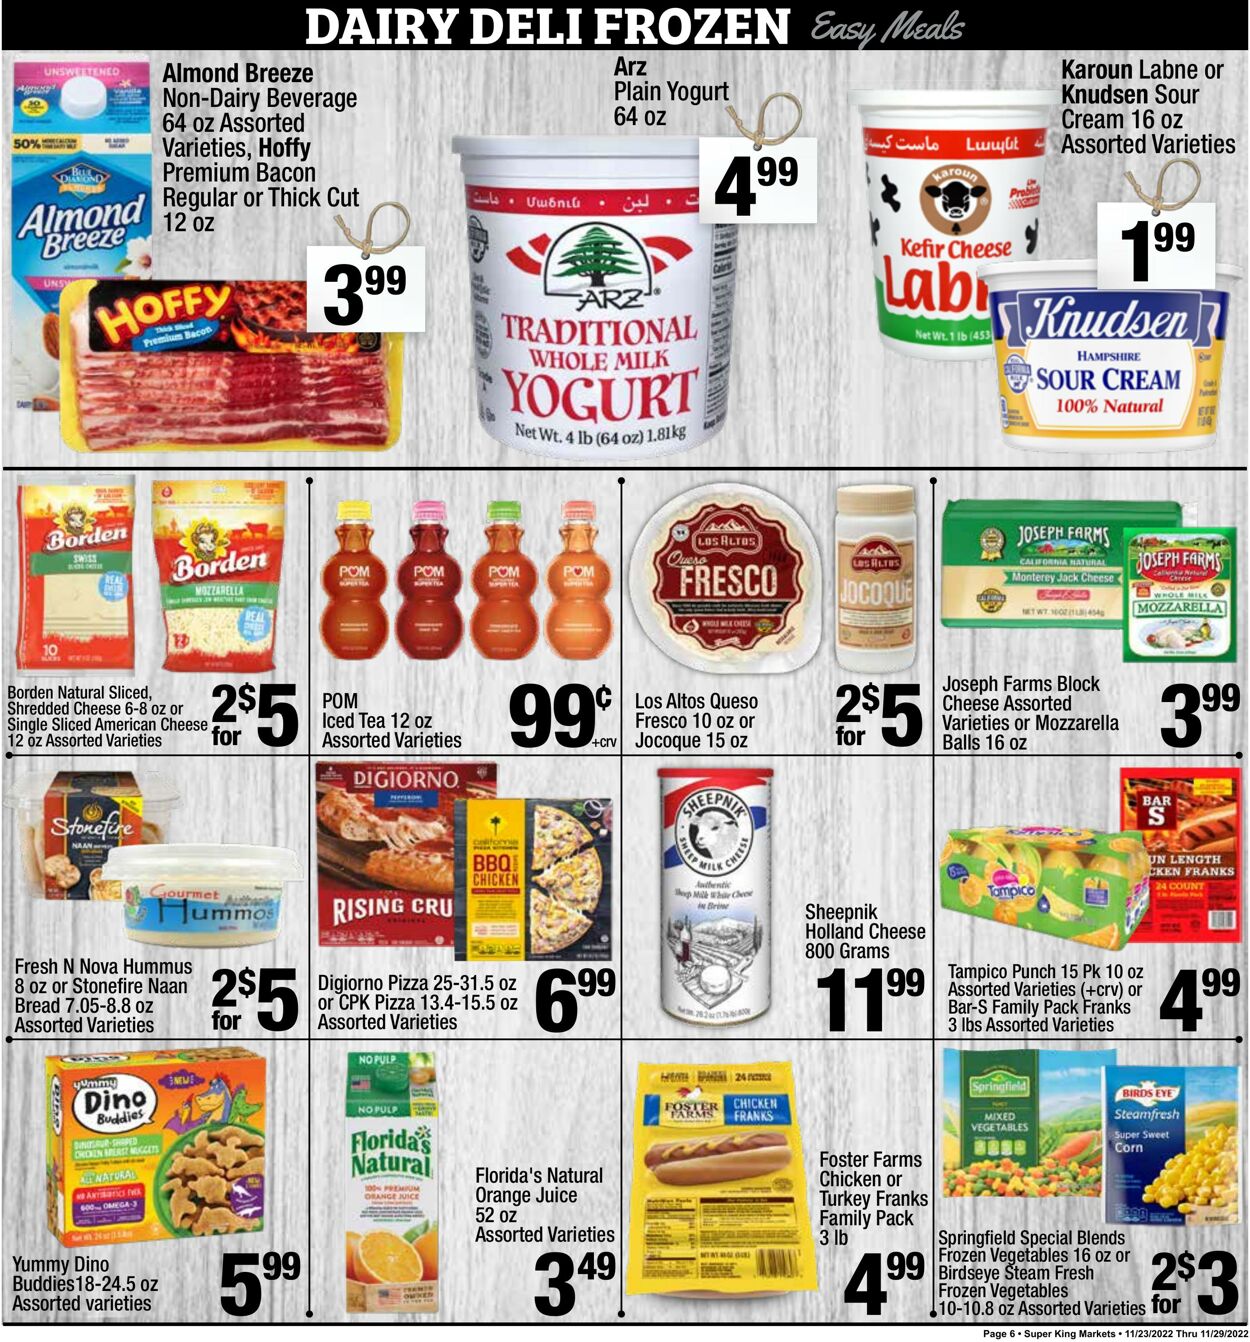 Weekly ad Super King Markets 11/23/2022 - 11/29/2022